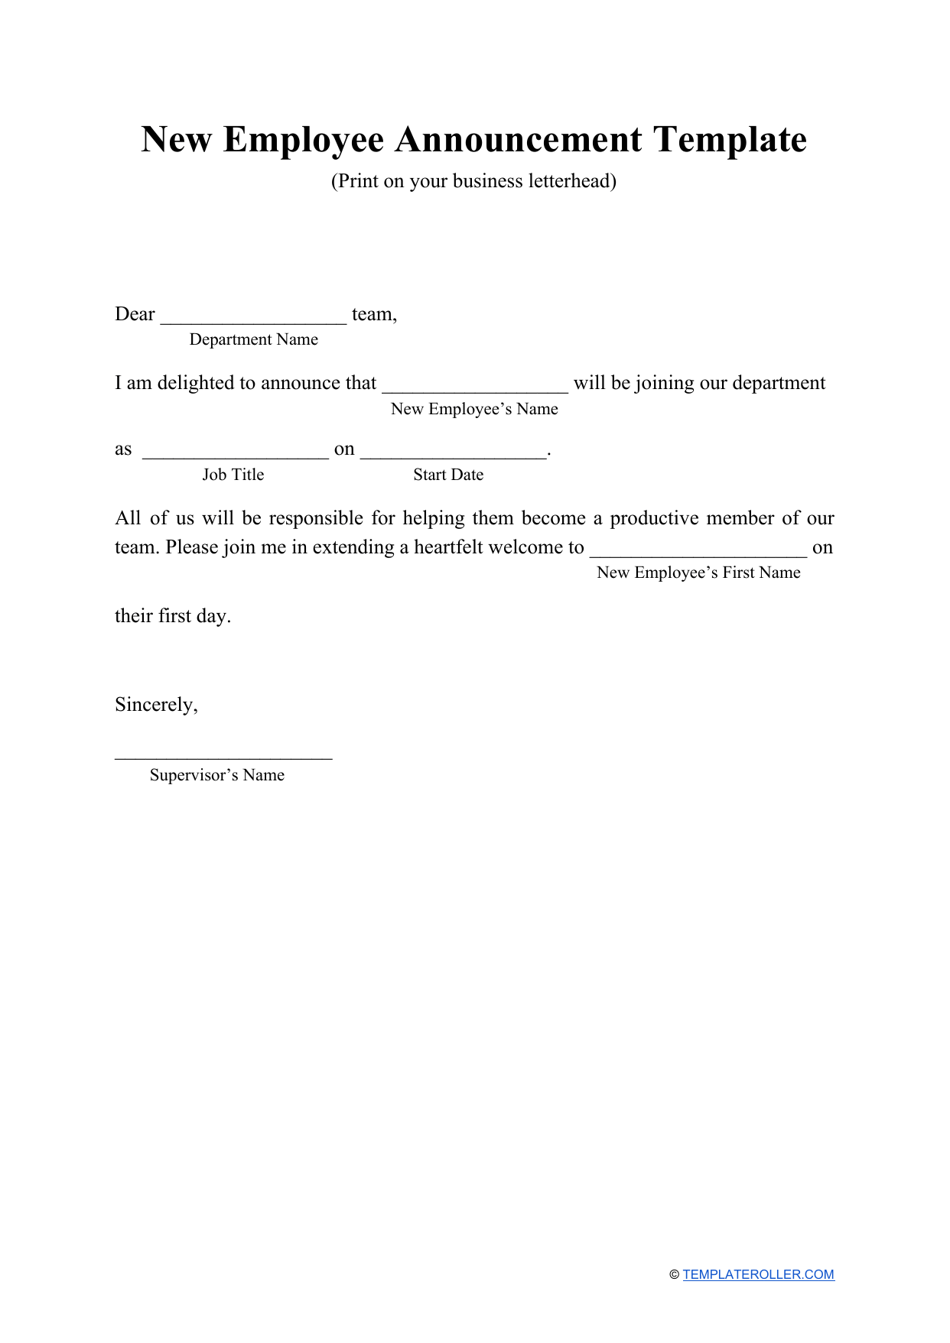 New Employee Announcement Template, Page 1